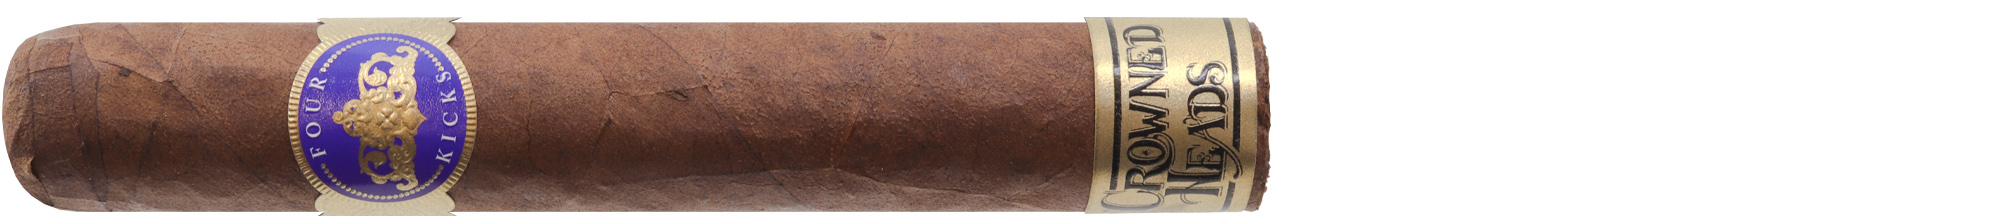 Crowned Heads Four Kicks Capa Especial Robusto
